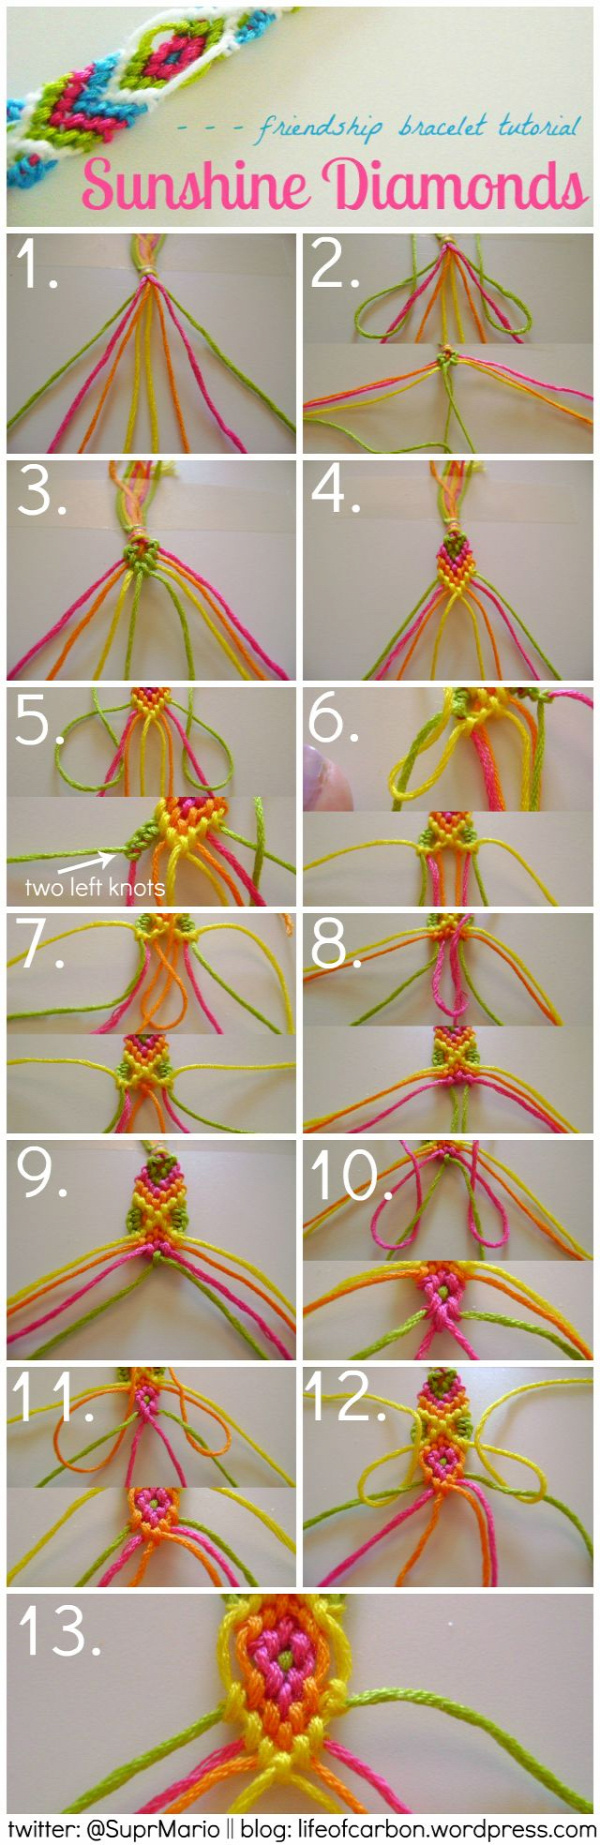 Sunshine Diamonds Friendship Bracelet Tutorial (Not that I have the skill for this, but maybe one day I'll get crazy super powers or something and be able to make this....)